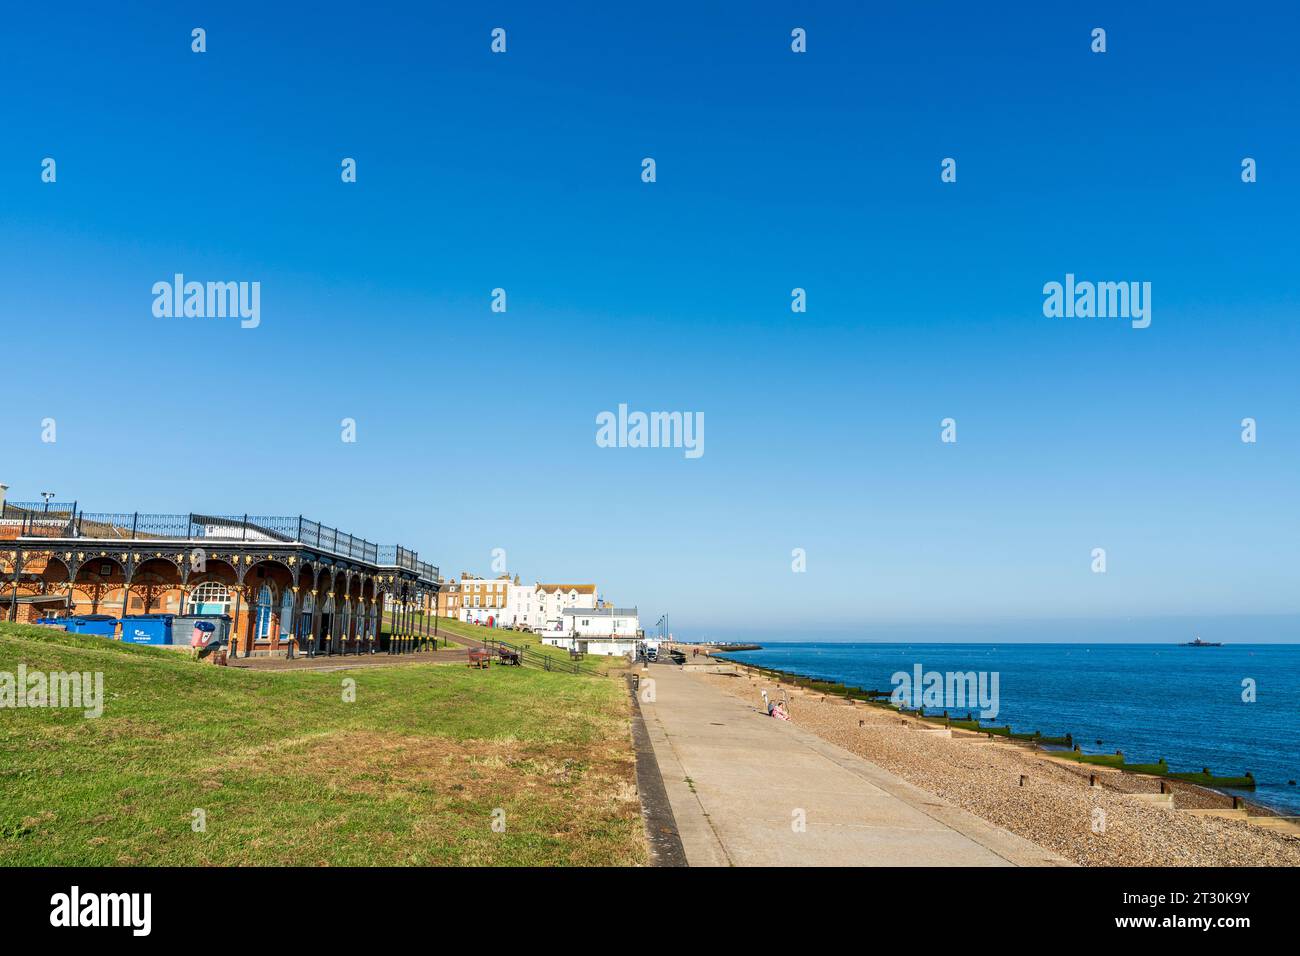 Edwardian period concert hall, The King's hall, facing the sea and beach on the seafront at the Kent resort town of Herne bay, Kent. Clear blue sky. Stock Photo